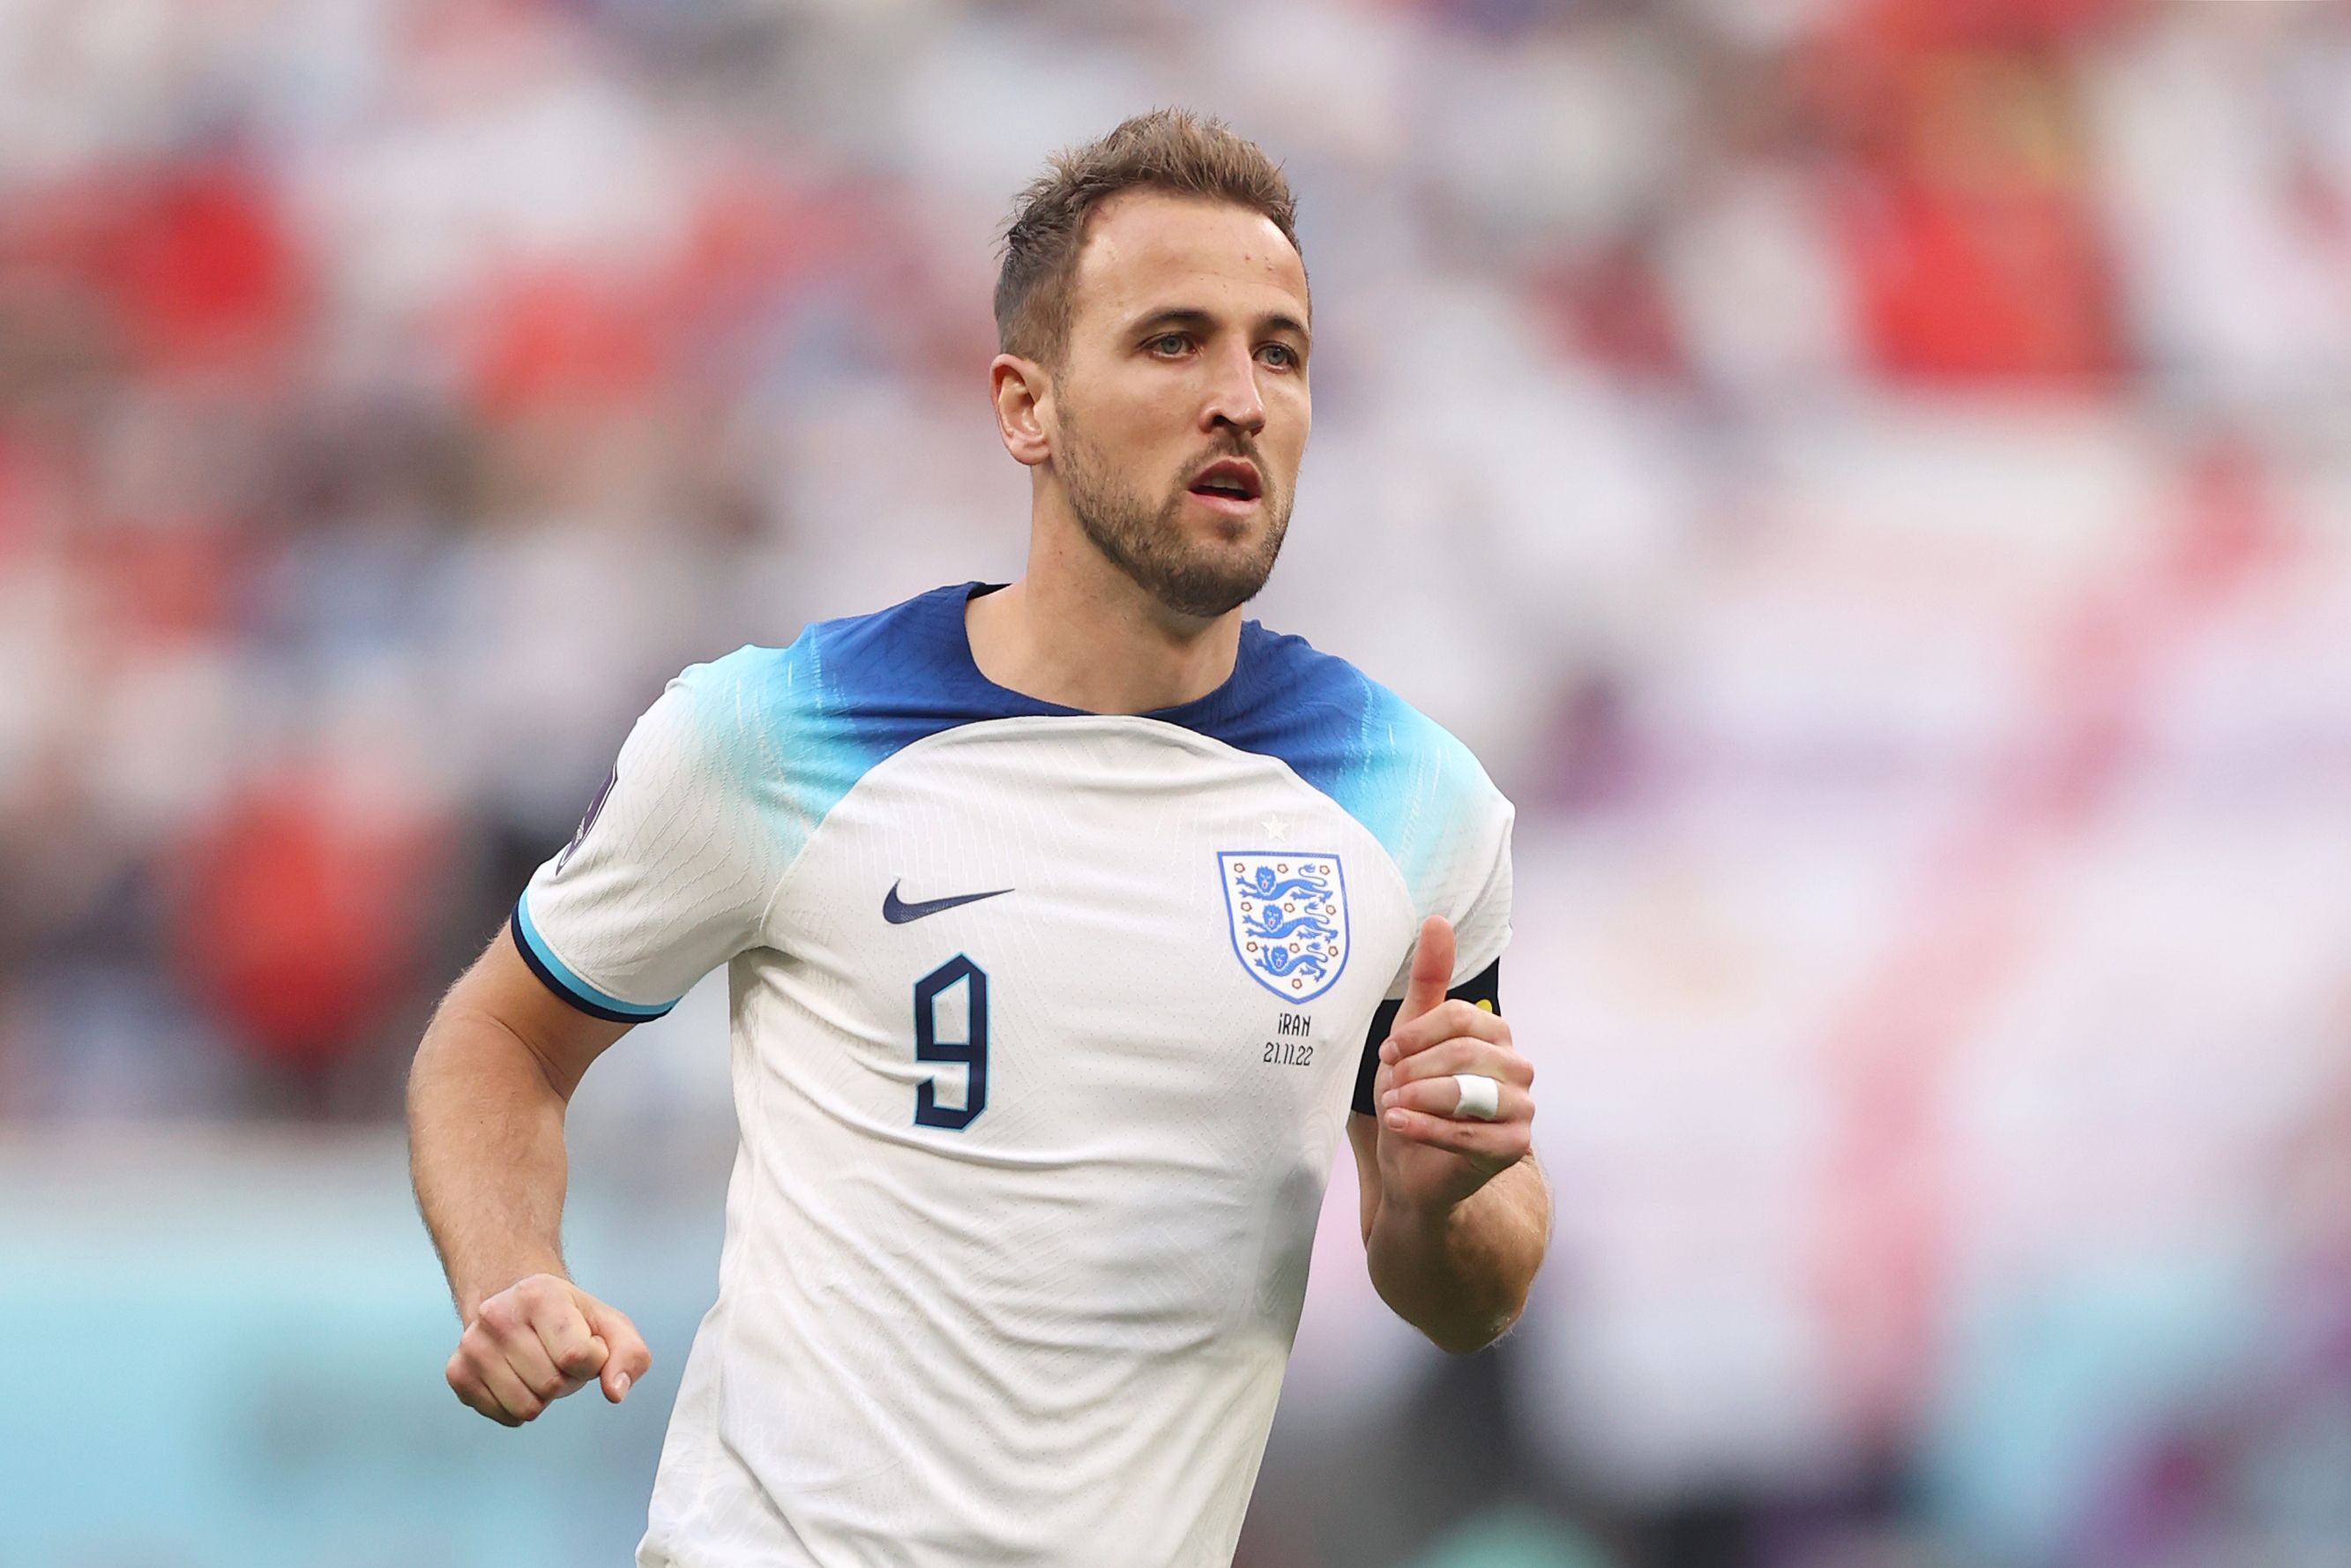 Harry Kane of England at the 2022 World Cup in Qatar